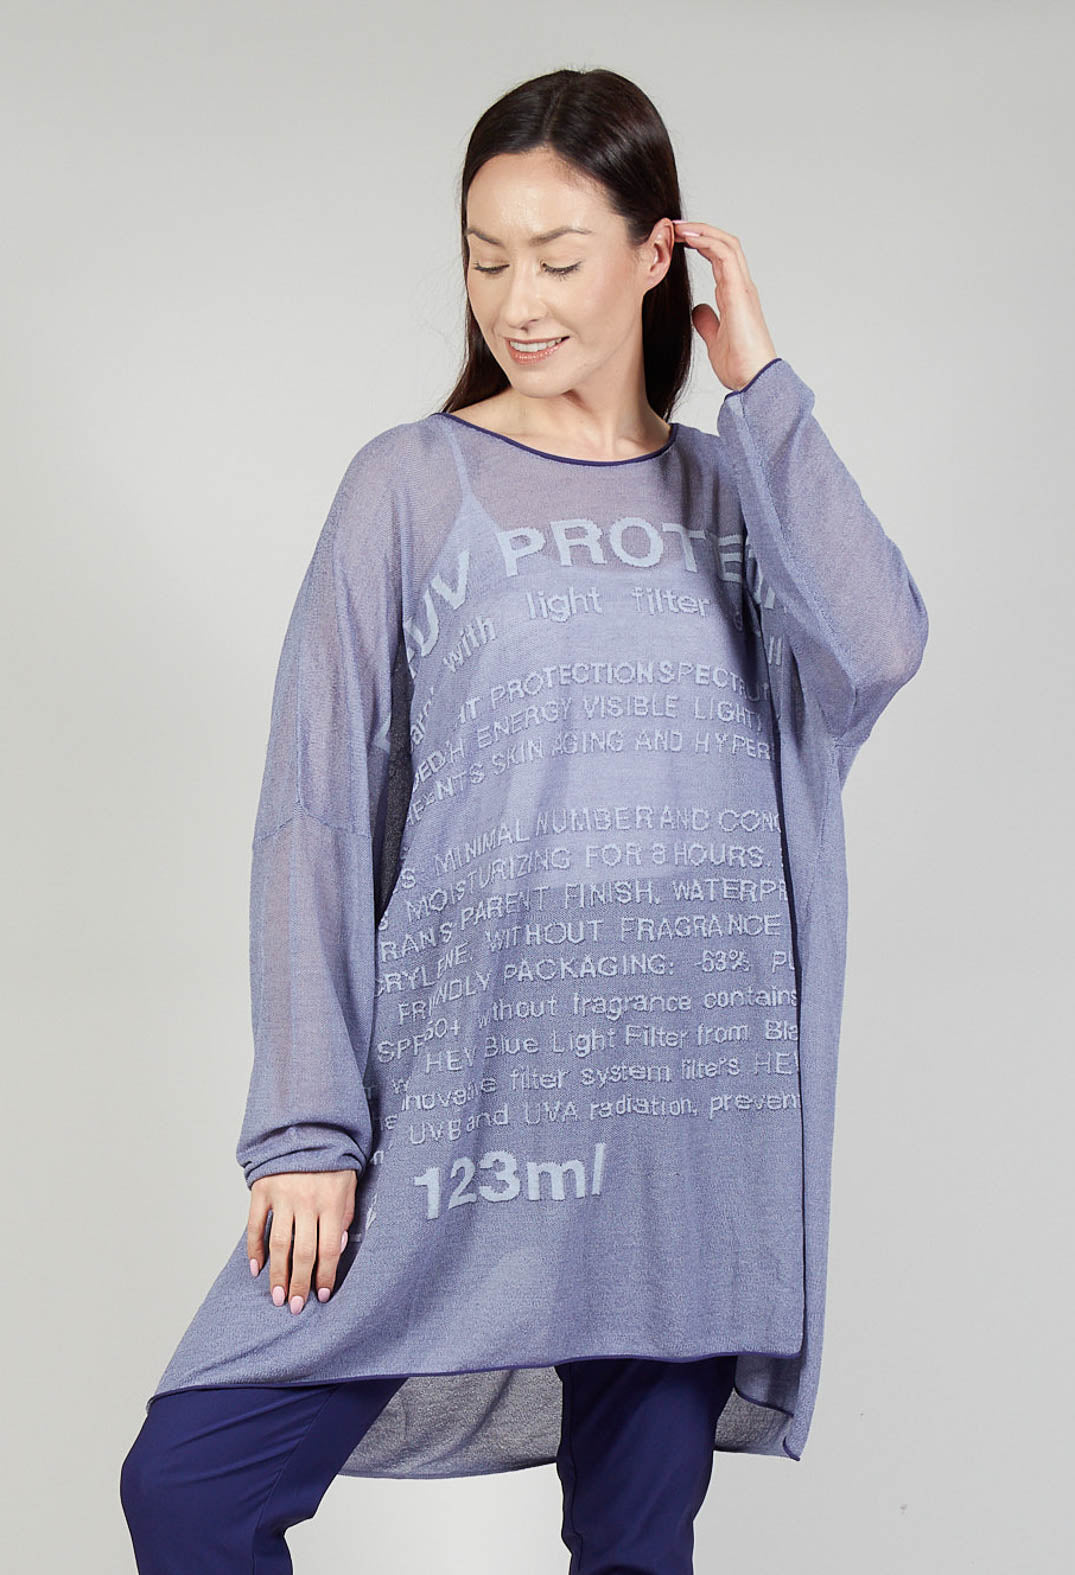 Relaxed Fit Jumper Dress with Motif in Azur Jacquard